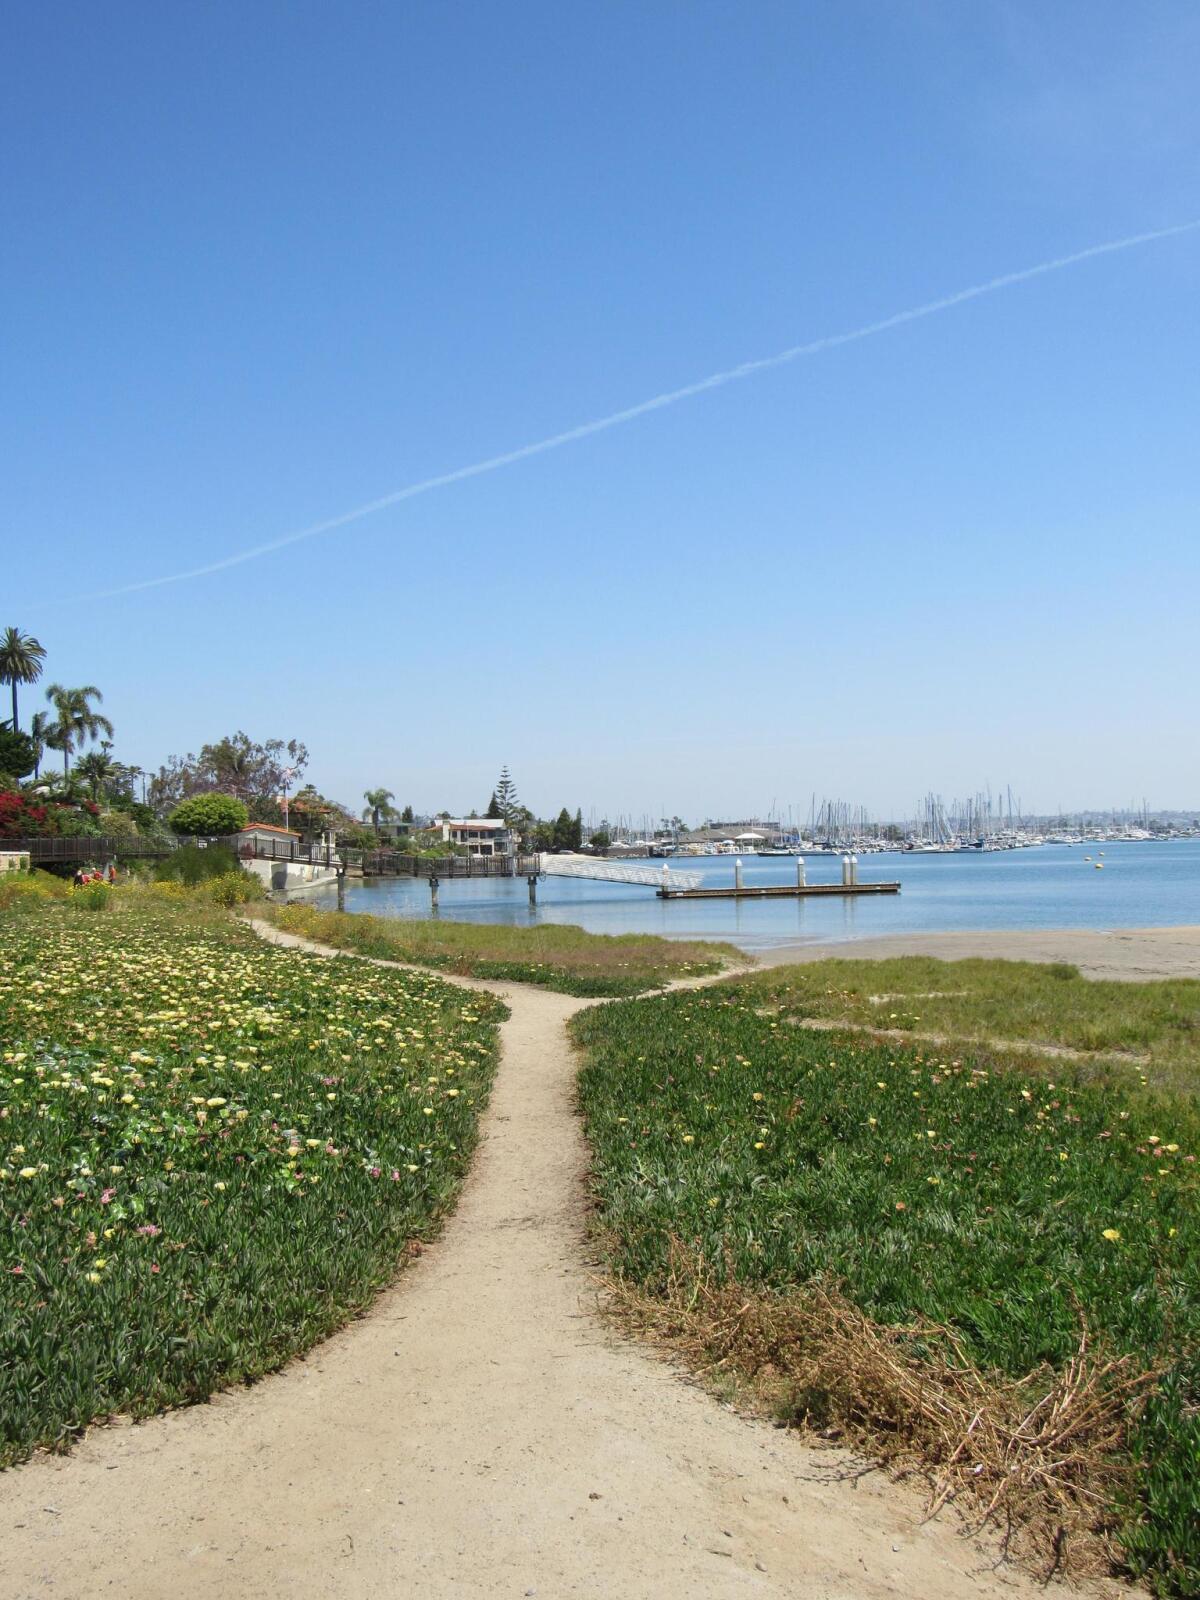 THE LONG AND WINDING ROAD ... La Playa Bayside Trail refers to the dirt path that meanders along the bay from Talbot Street to Qualtrough Street in Point Loma.